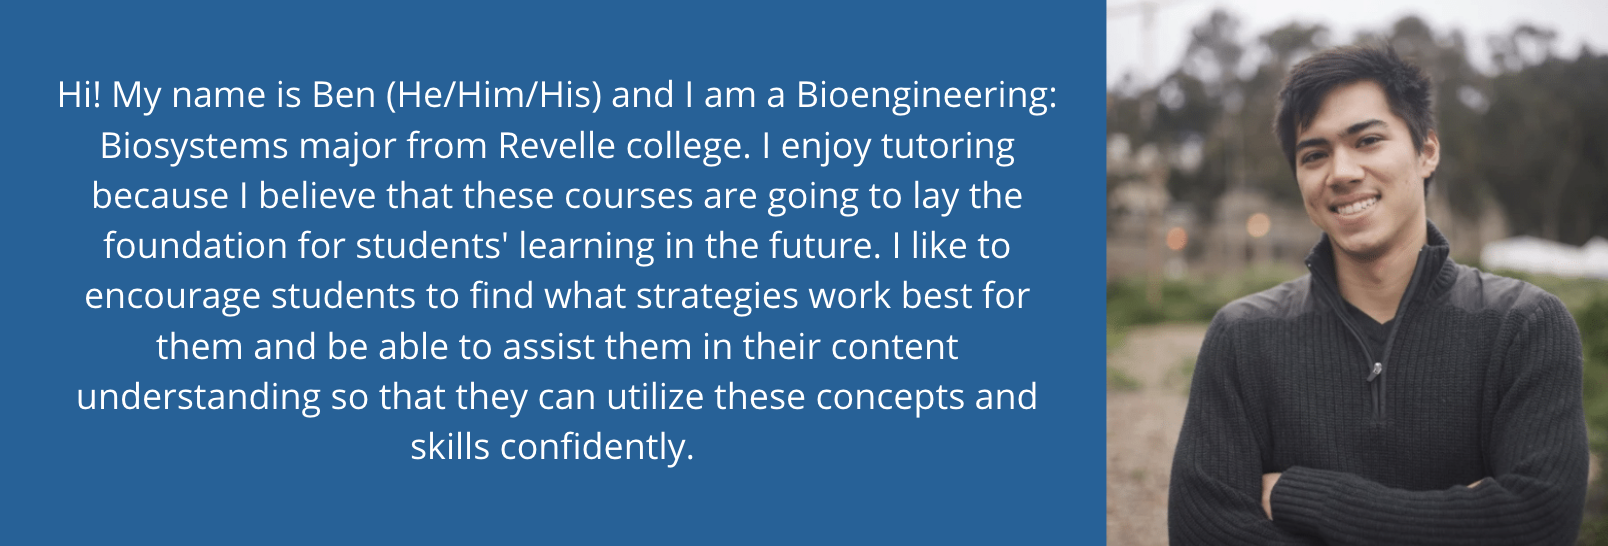 1 of 3, Hi! My name is Ben (He/Him/His) and I am a Bioengineering: Biosystems major from Revelle college. I enjoy tutoring because I believe that these courses are going to lay the foundation for students' learning in the future. I like to encourage students to find what strategies work best for them and be able to assist them in their content understanding so that they can utilize these concepts and skills confidently. 